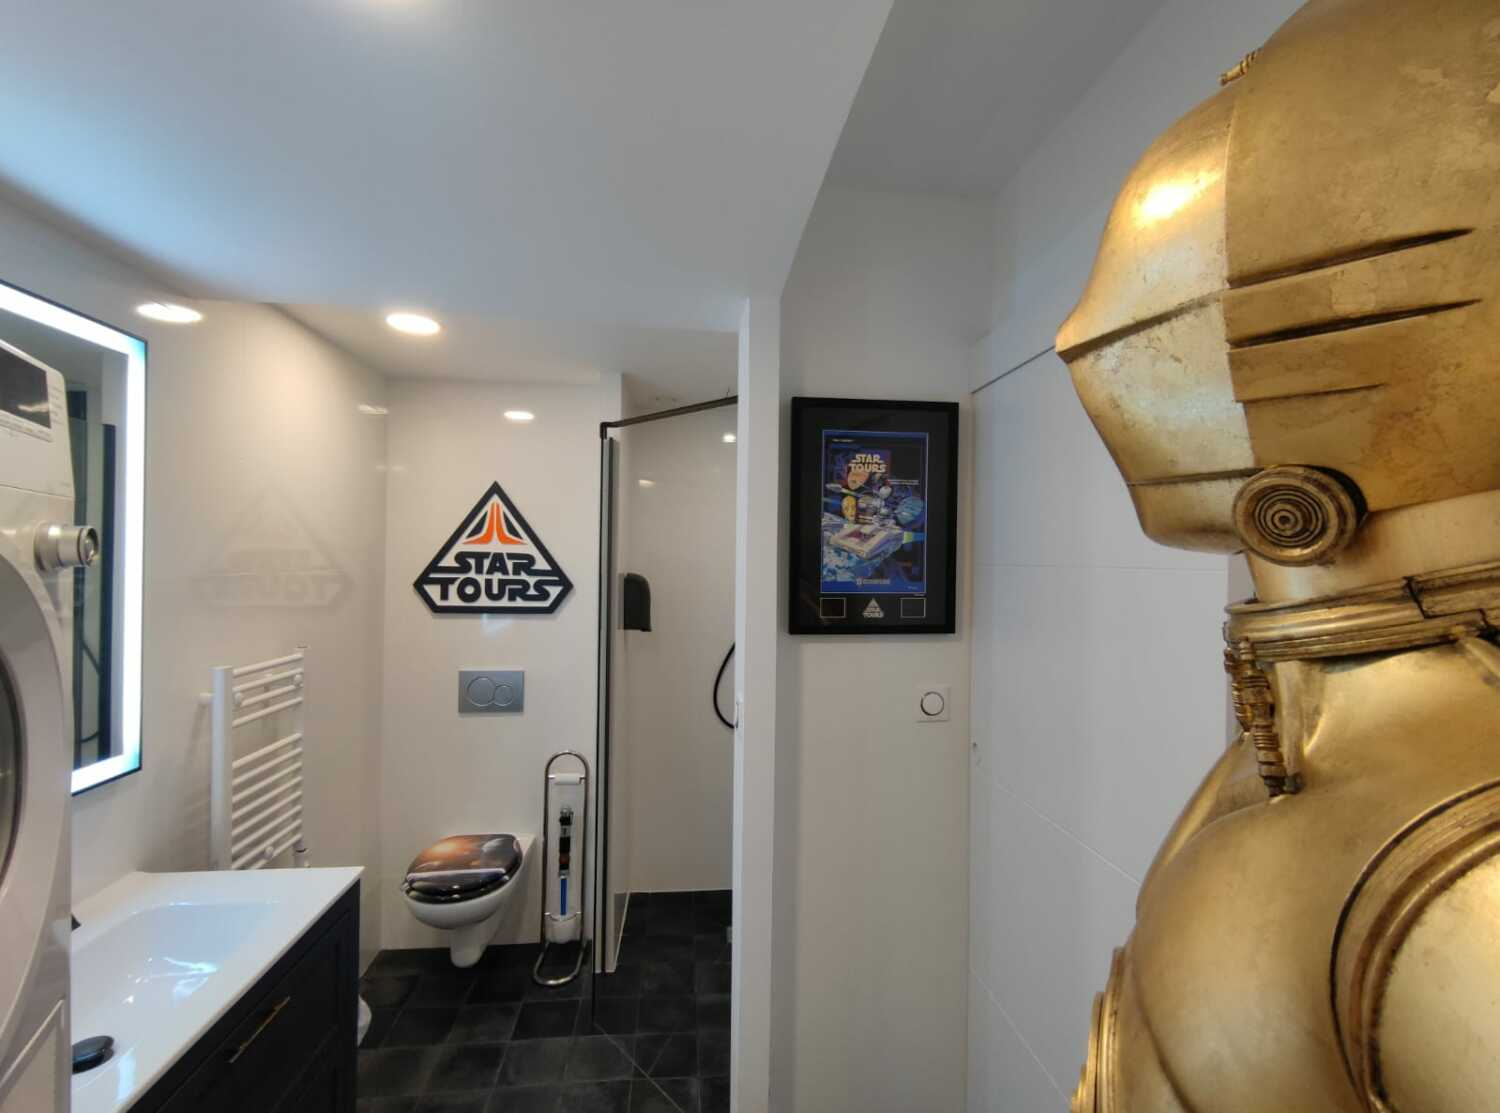 Star Wars Discoveryland Themed rooms near Disneyland Paris, Discoveryhome by Tadico Homes